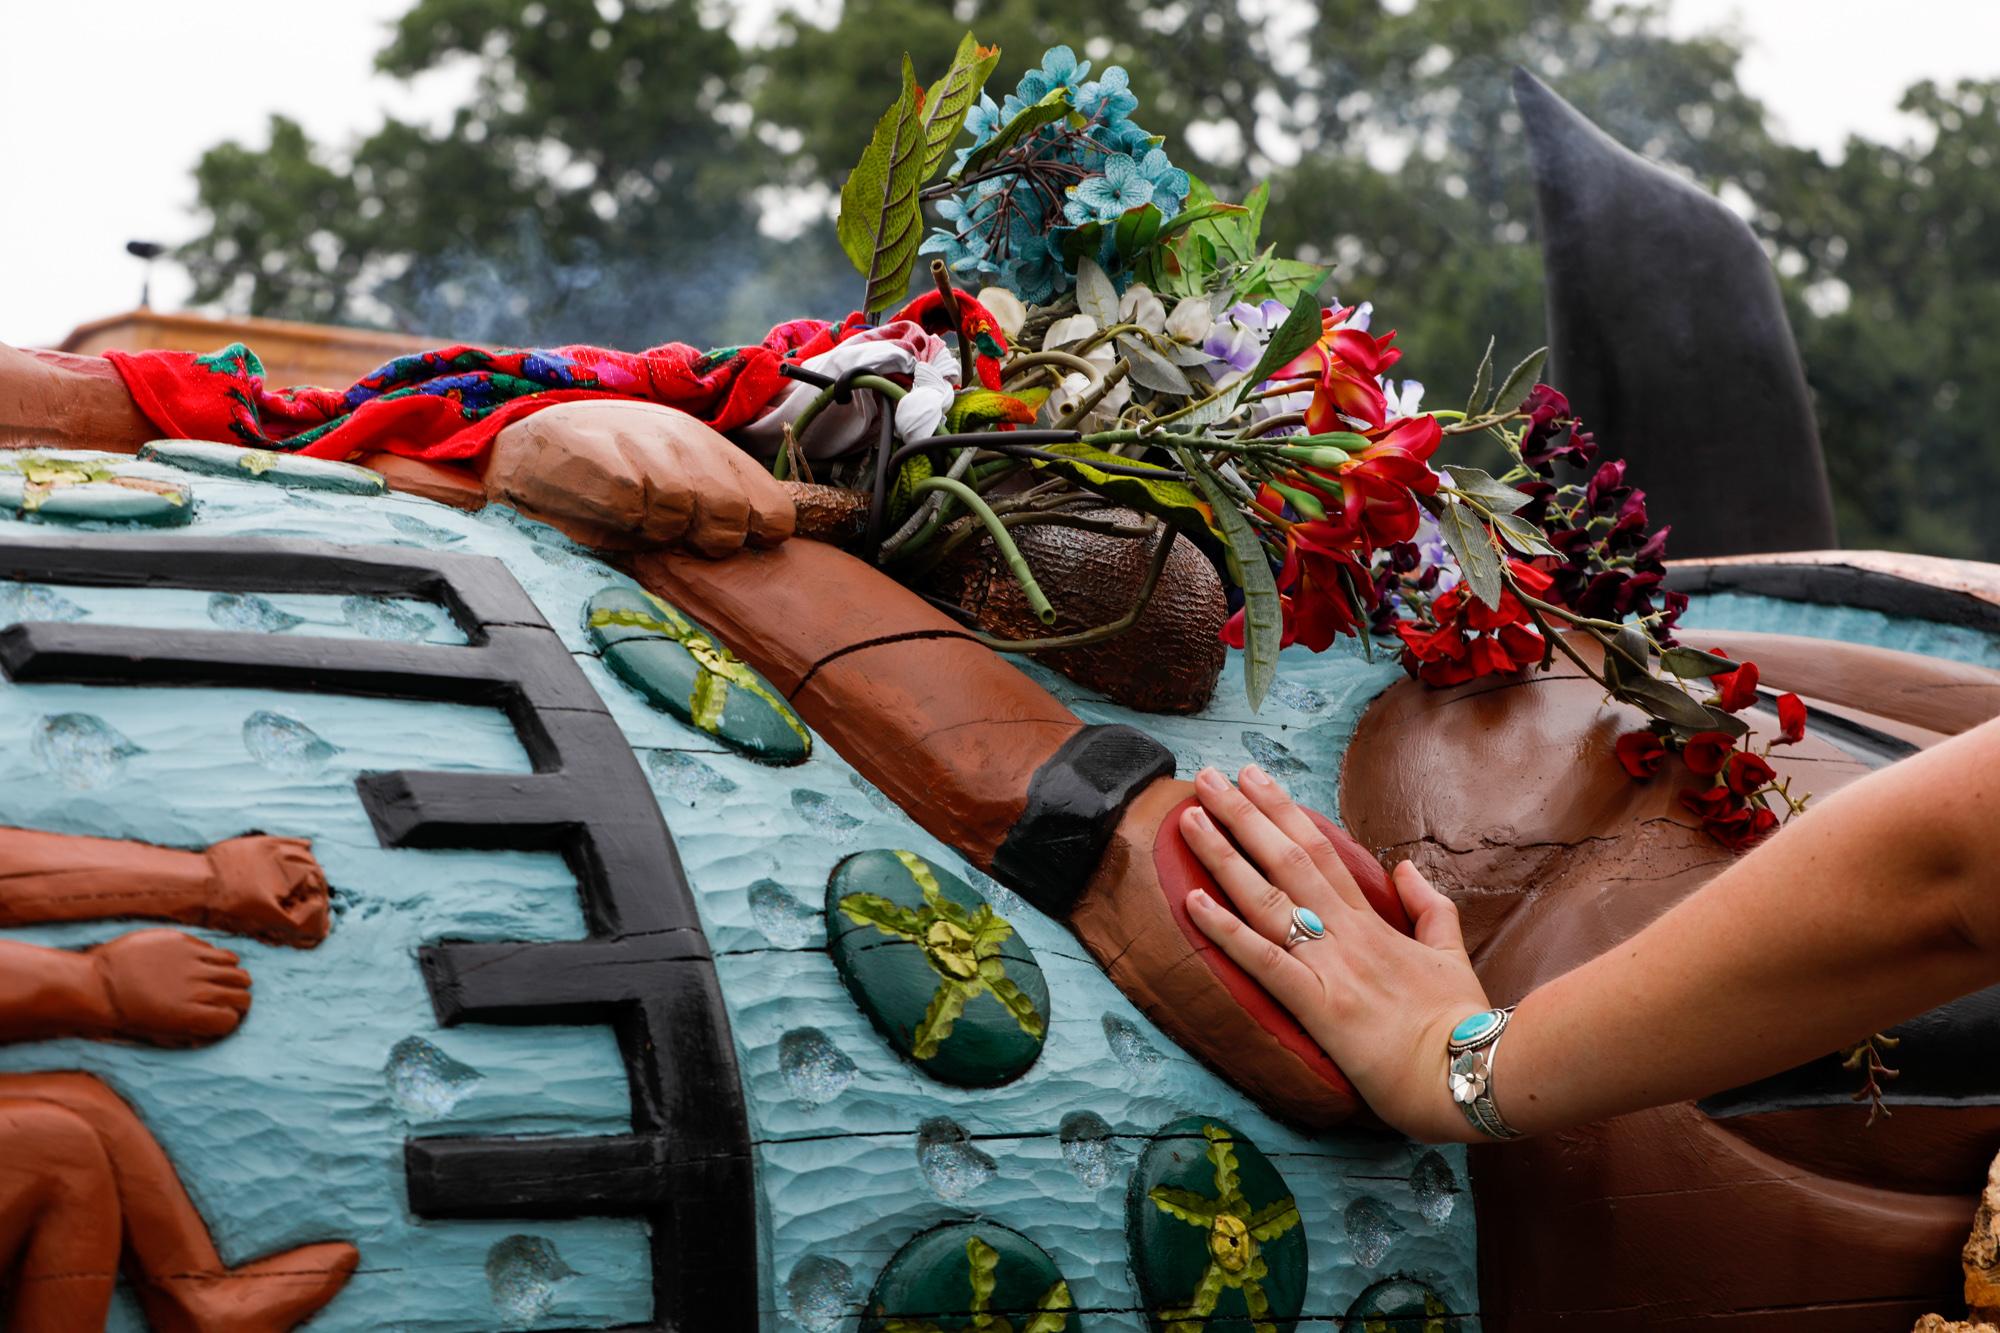 Woman places her hand over red carved hand on totem pole in the National Mall in Washington, DC. Thursday, July 29, 2021.